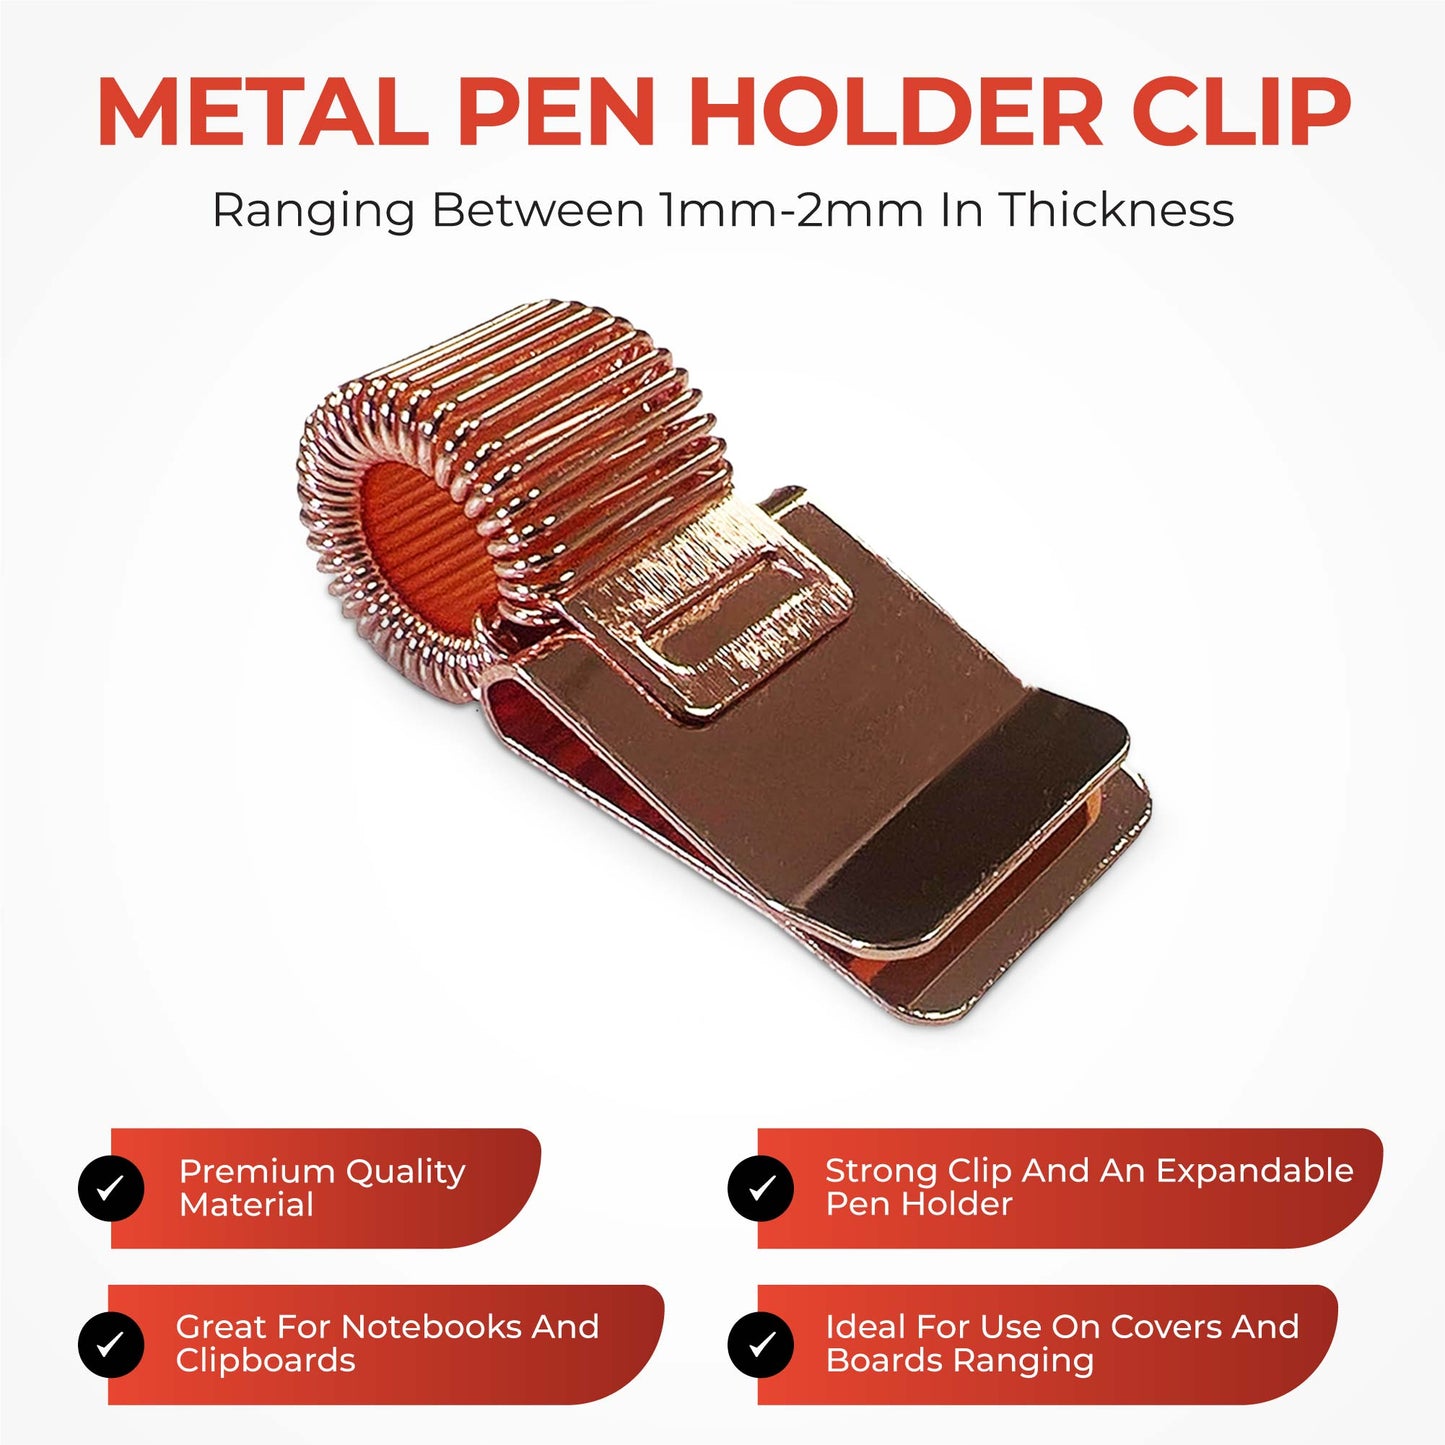 Pack of 100 Metal Pen Holder Clips for Notebook and Clipboard